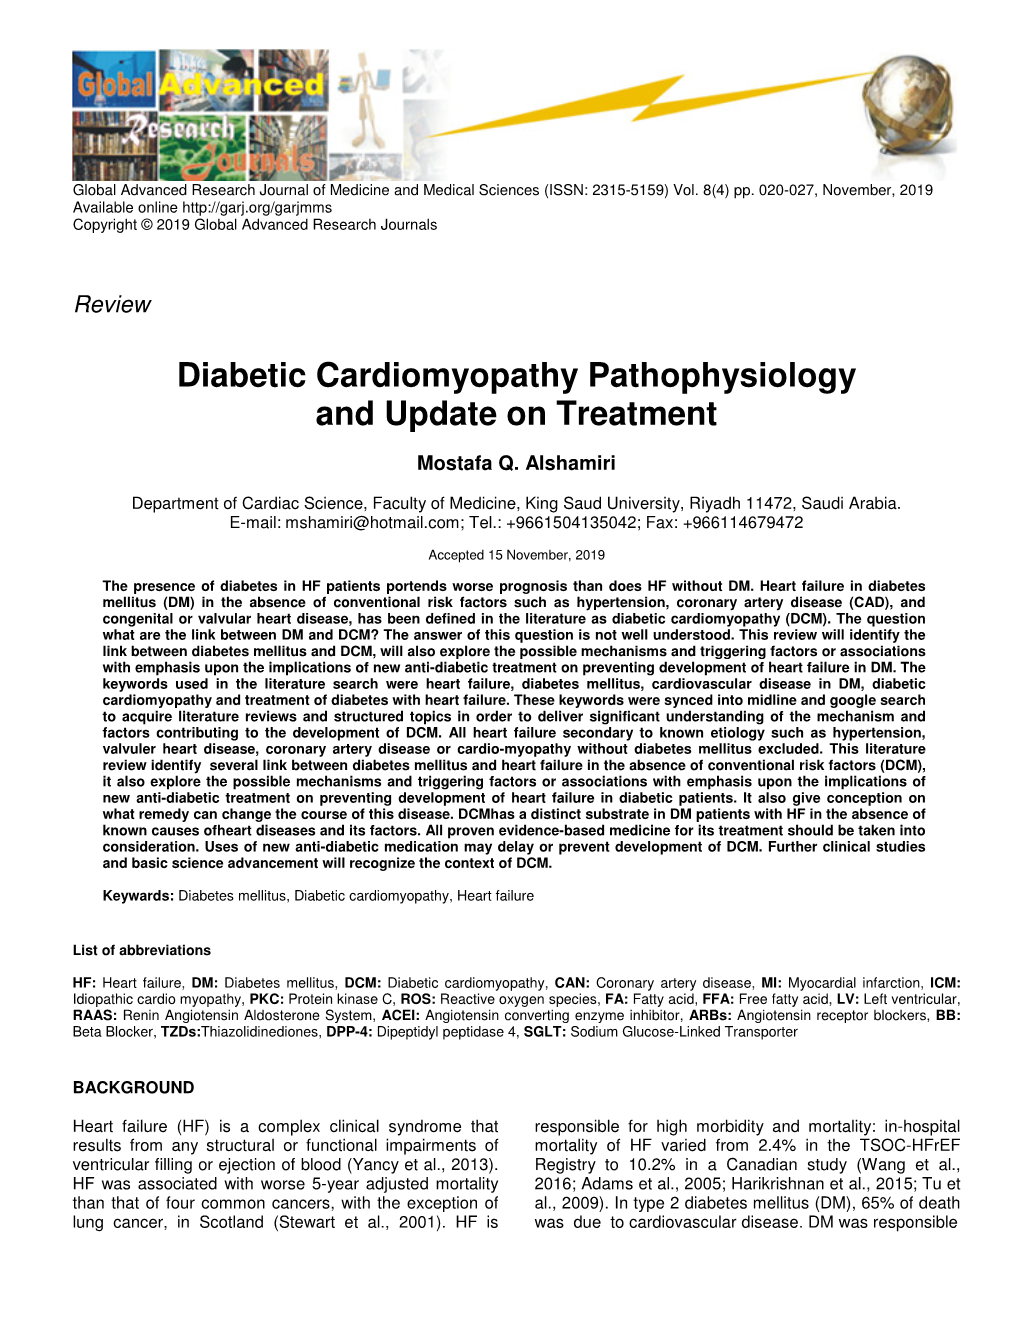 Diabetic Cardiomyopathy Pathophysiology and Update on Treatment